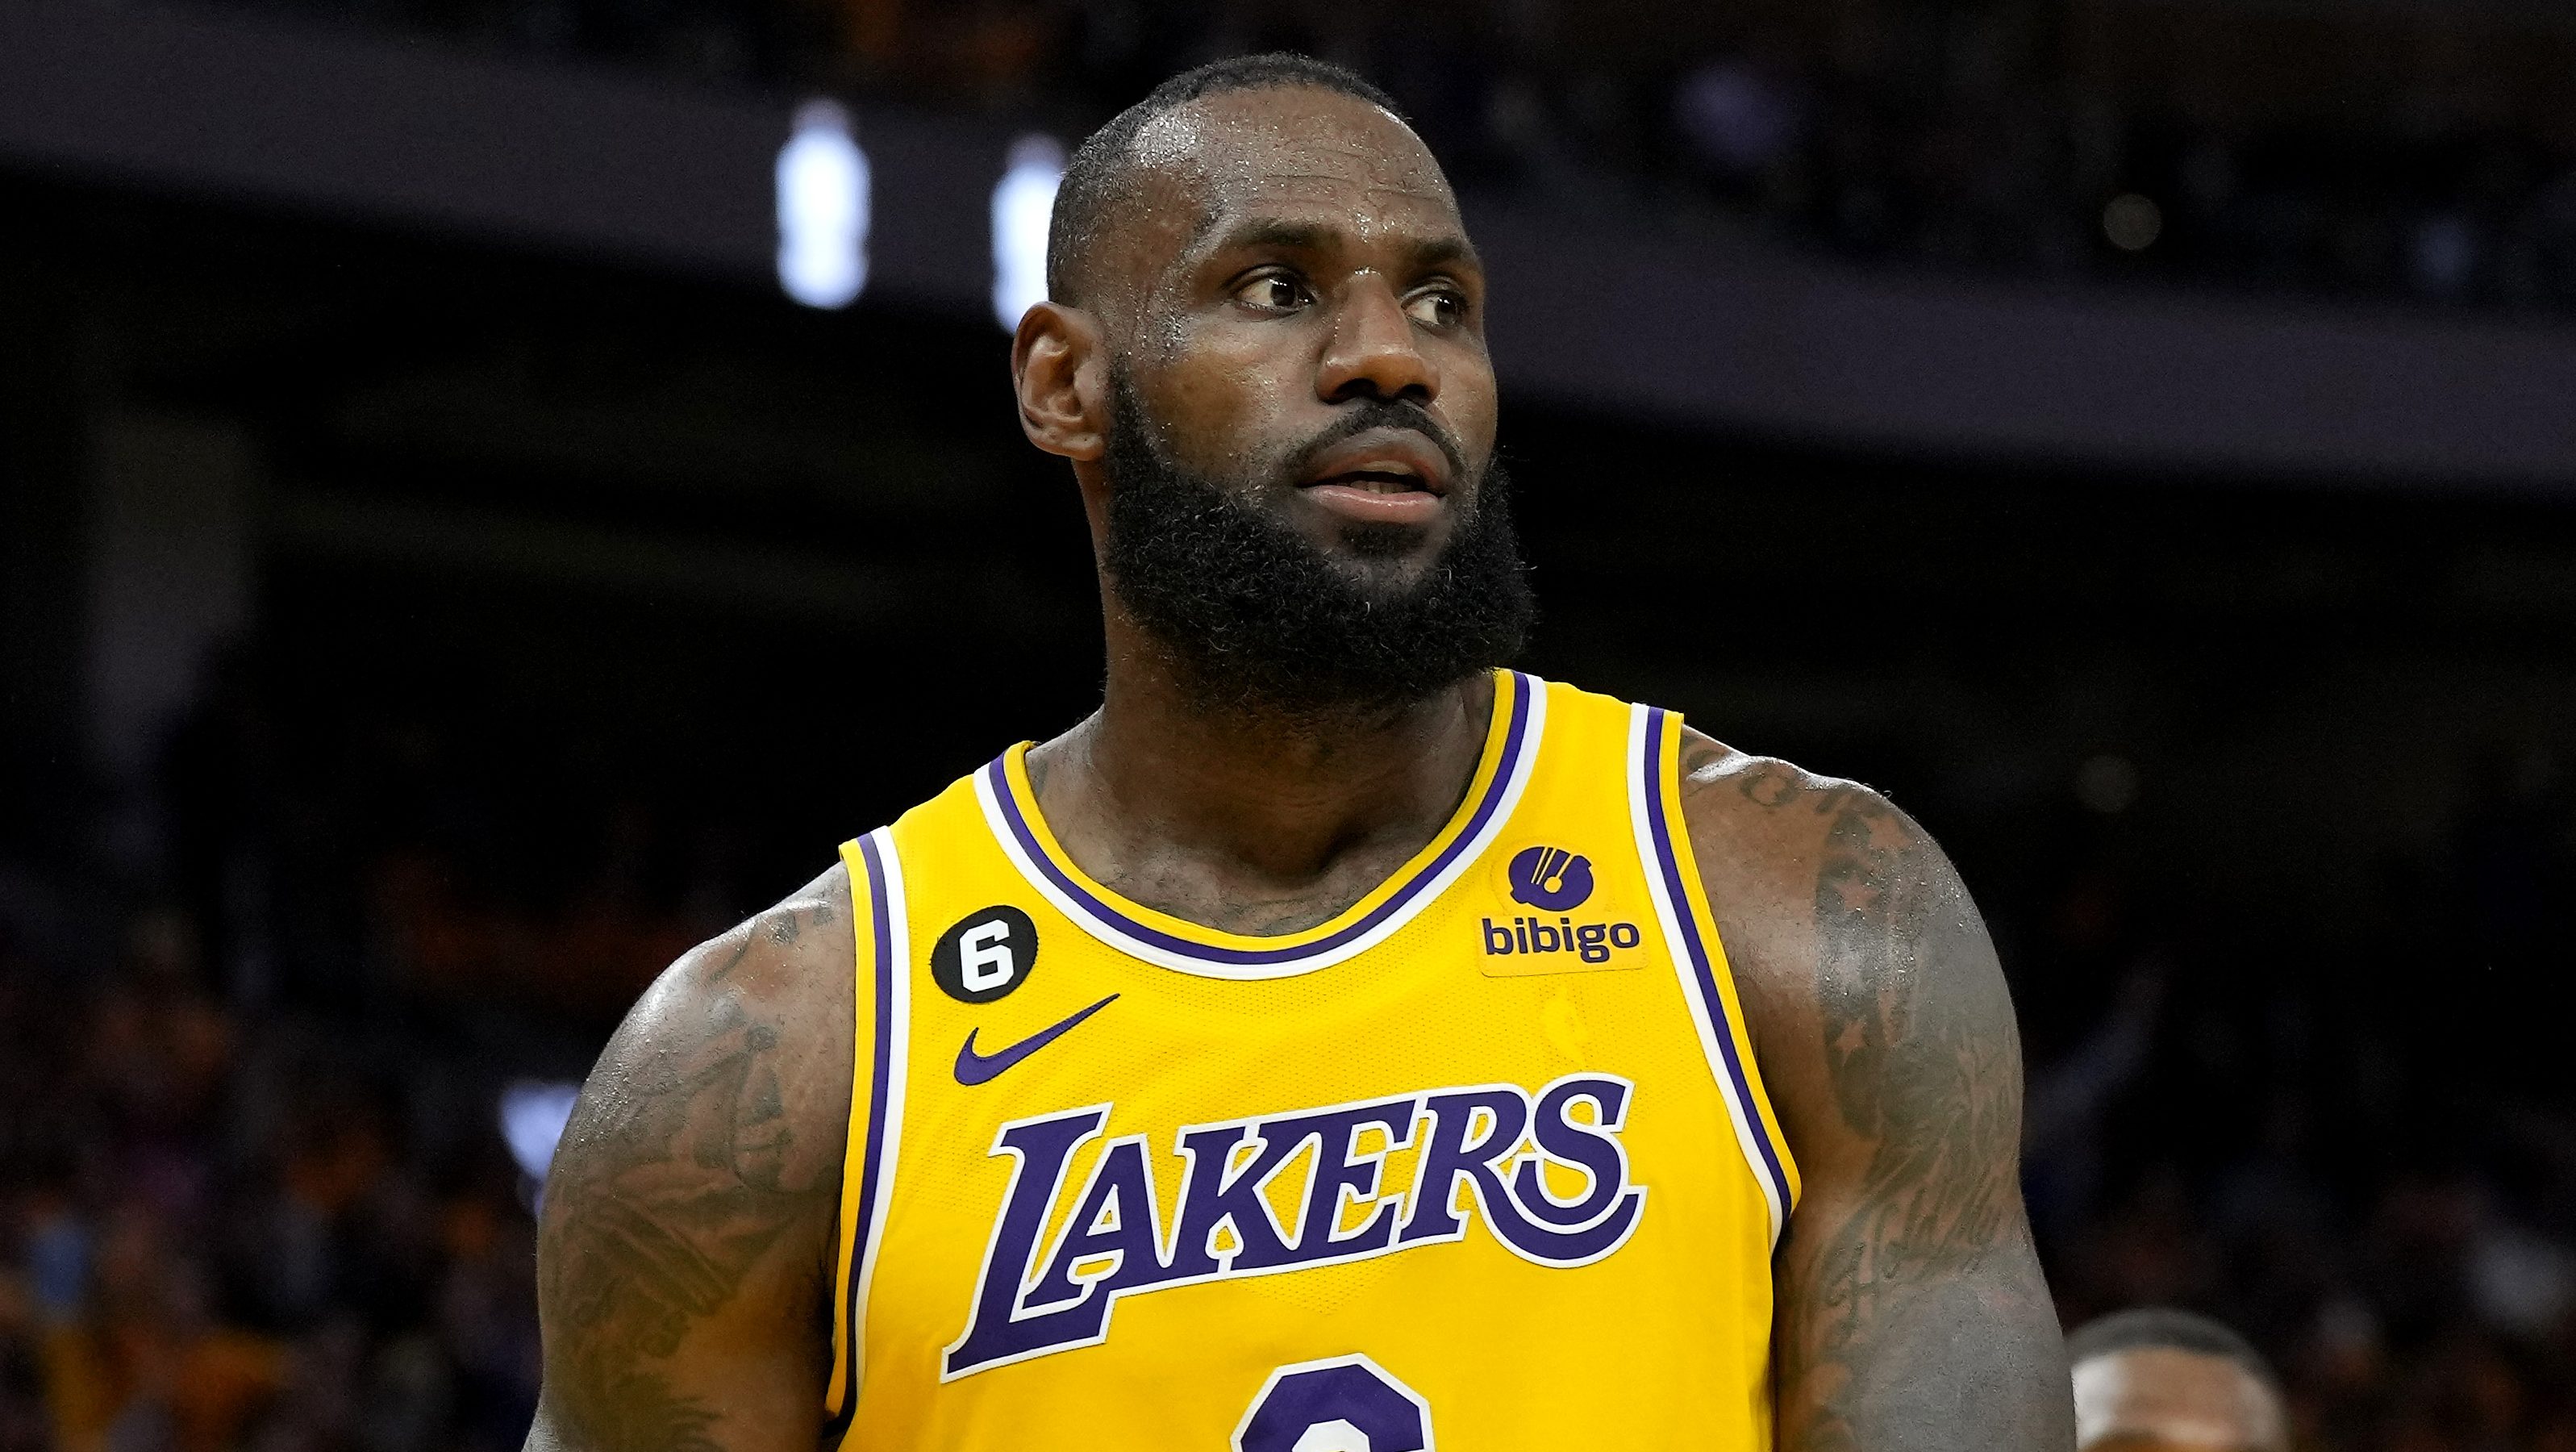 LeBron quotes Jay-Z on IG story: 'I'm suppose to be #1 on